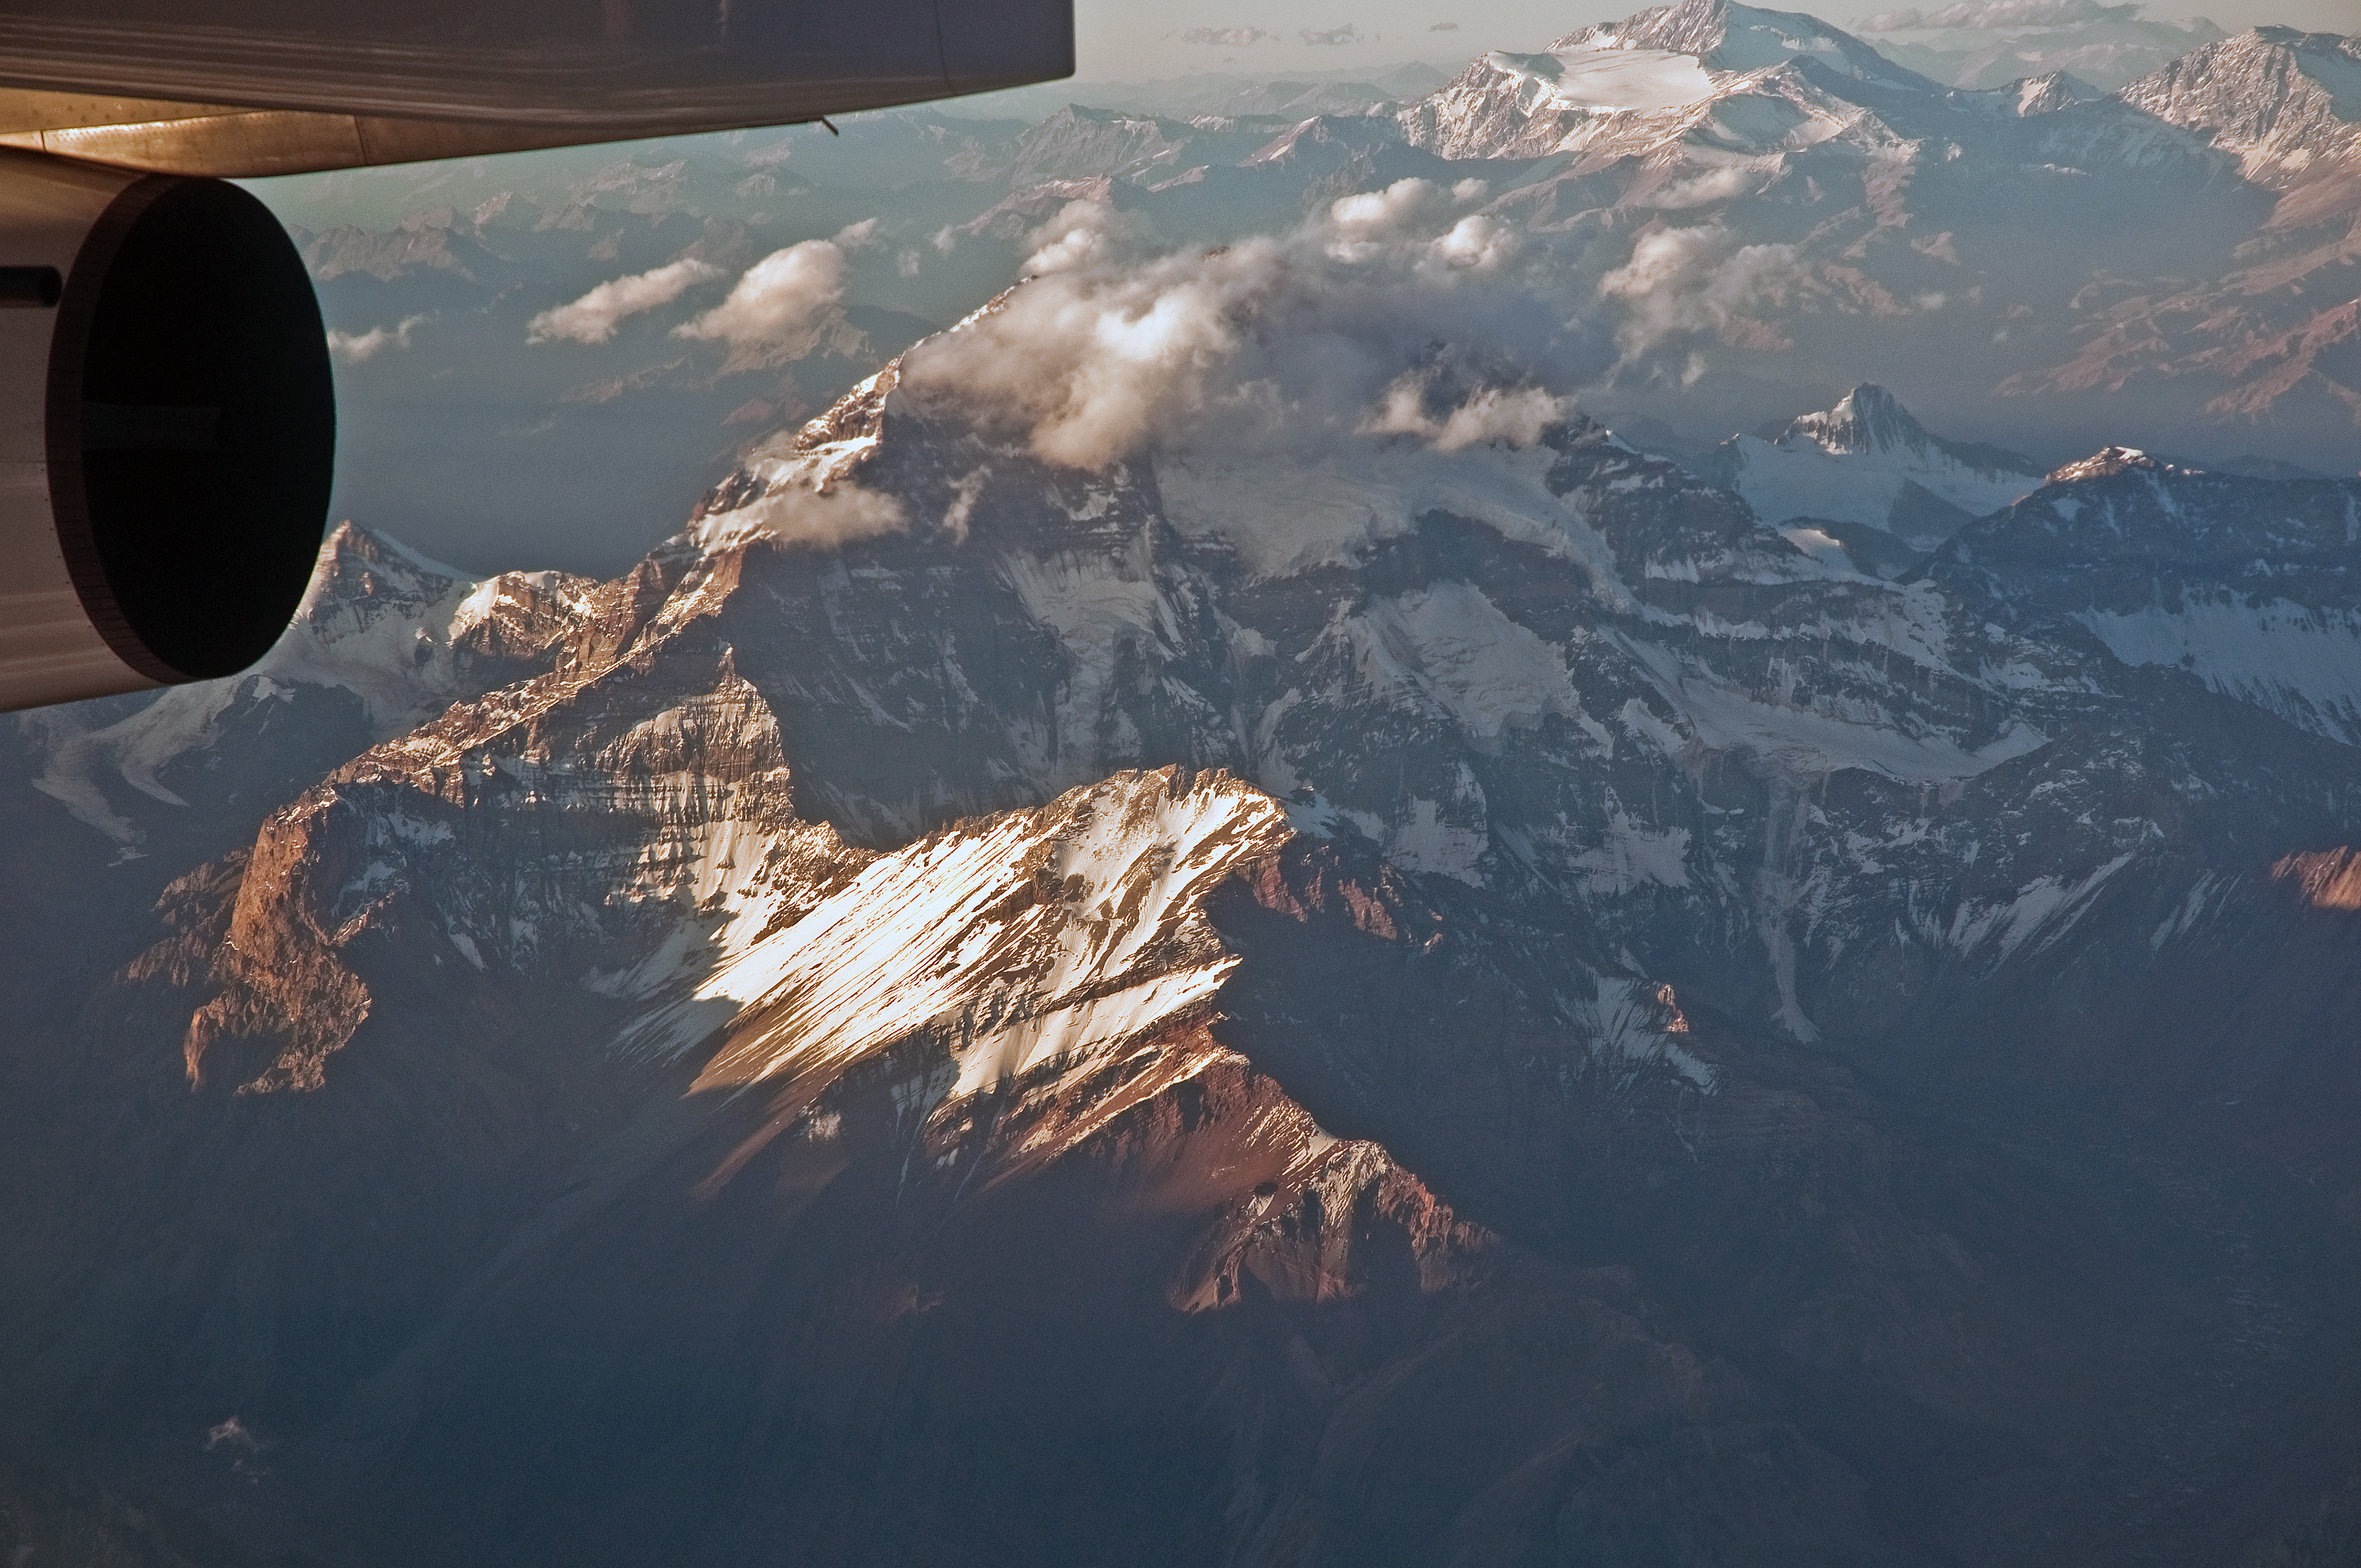 Crossing the Andes at sunset, 4, Aconcagua 18th. Jan. 2011 - Flickr - PhillipC